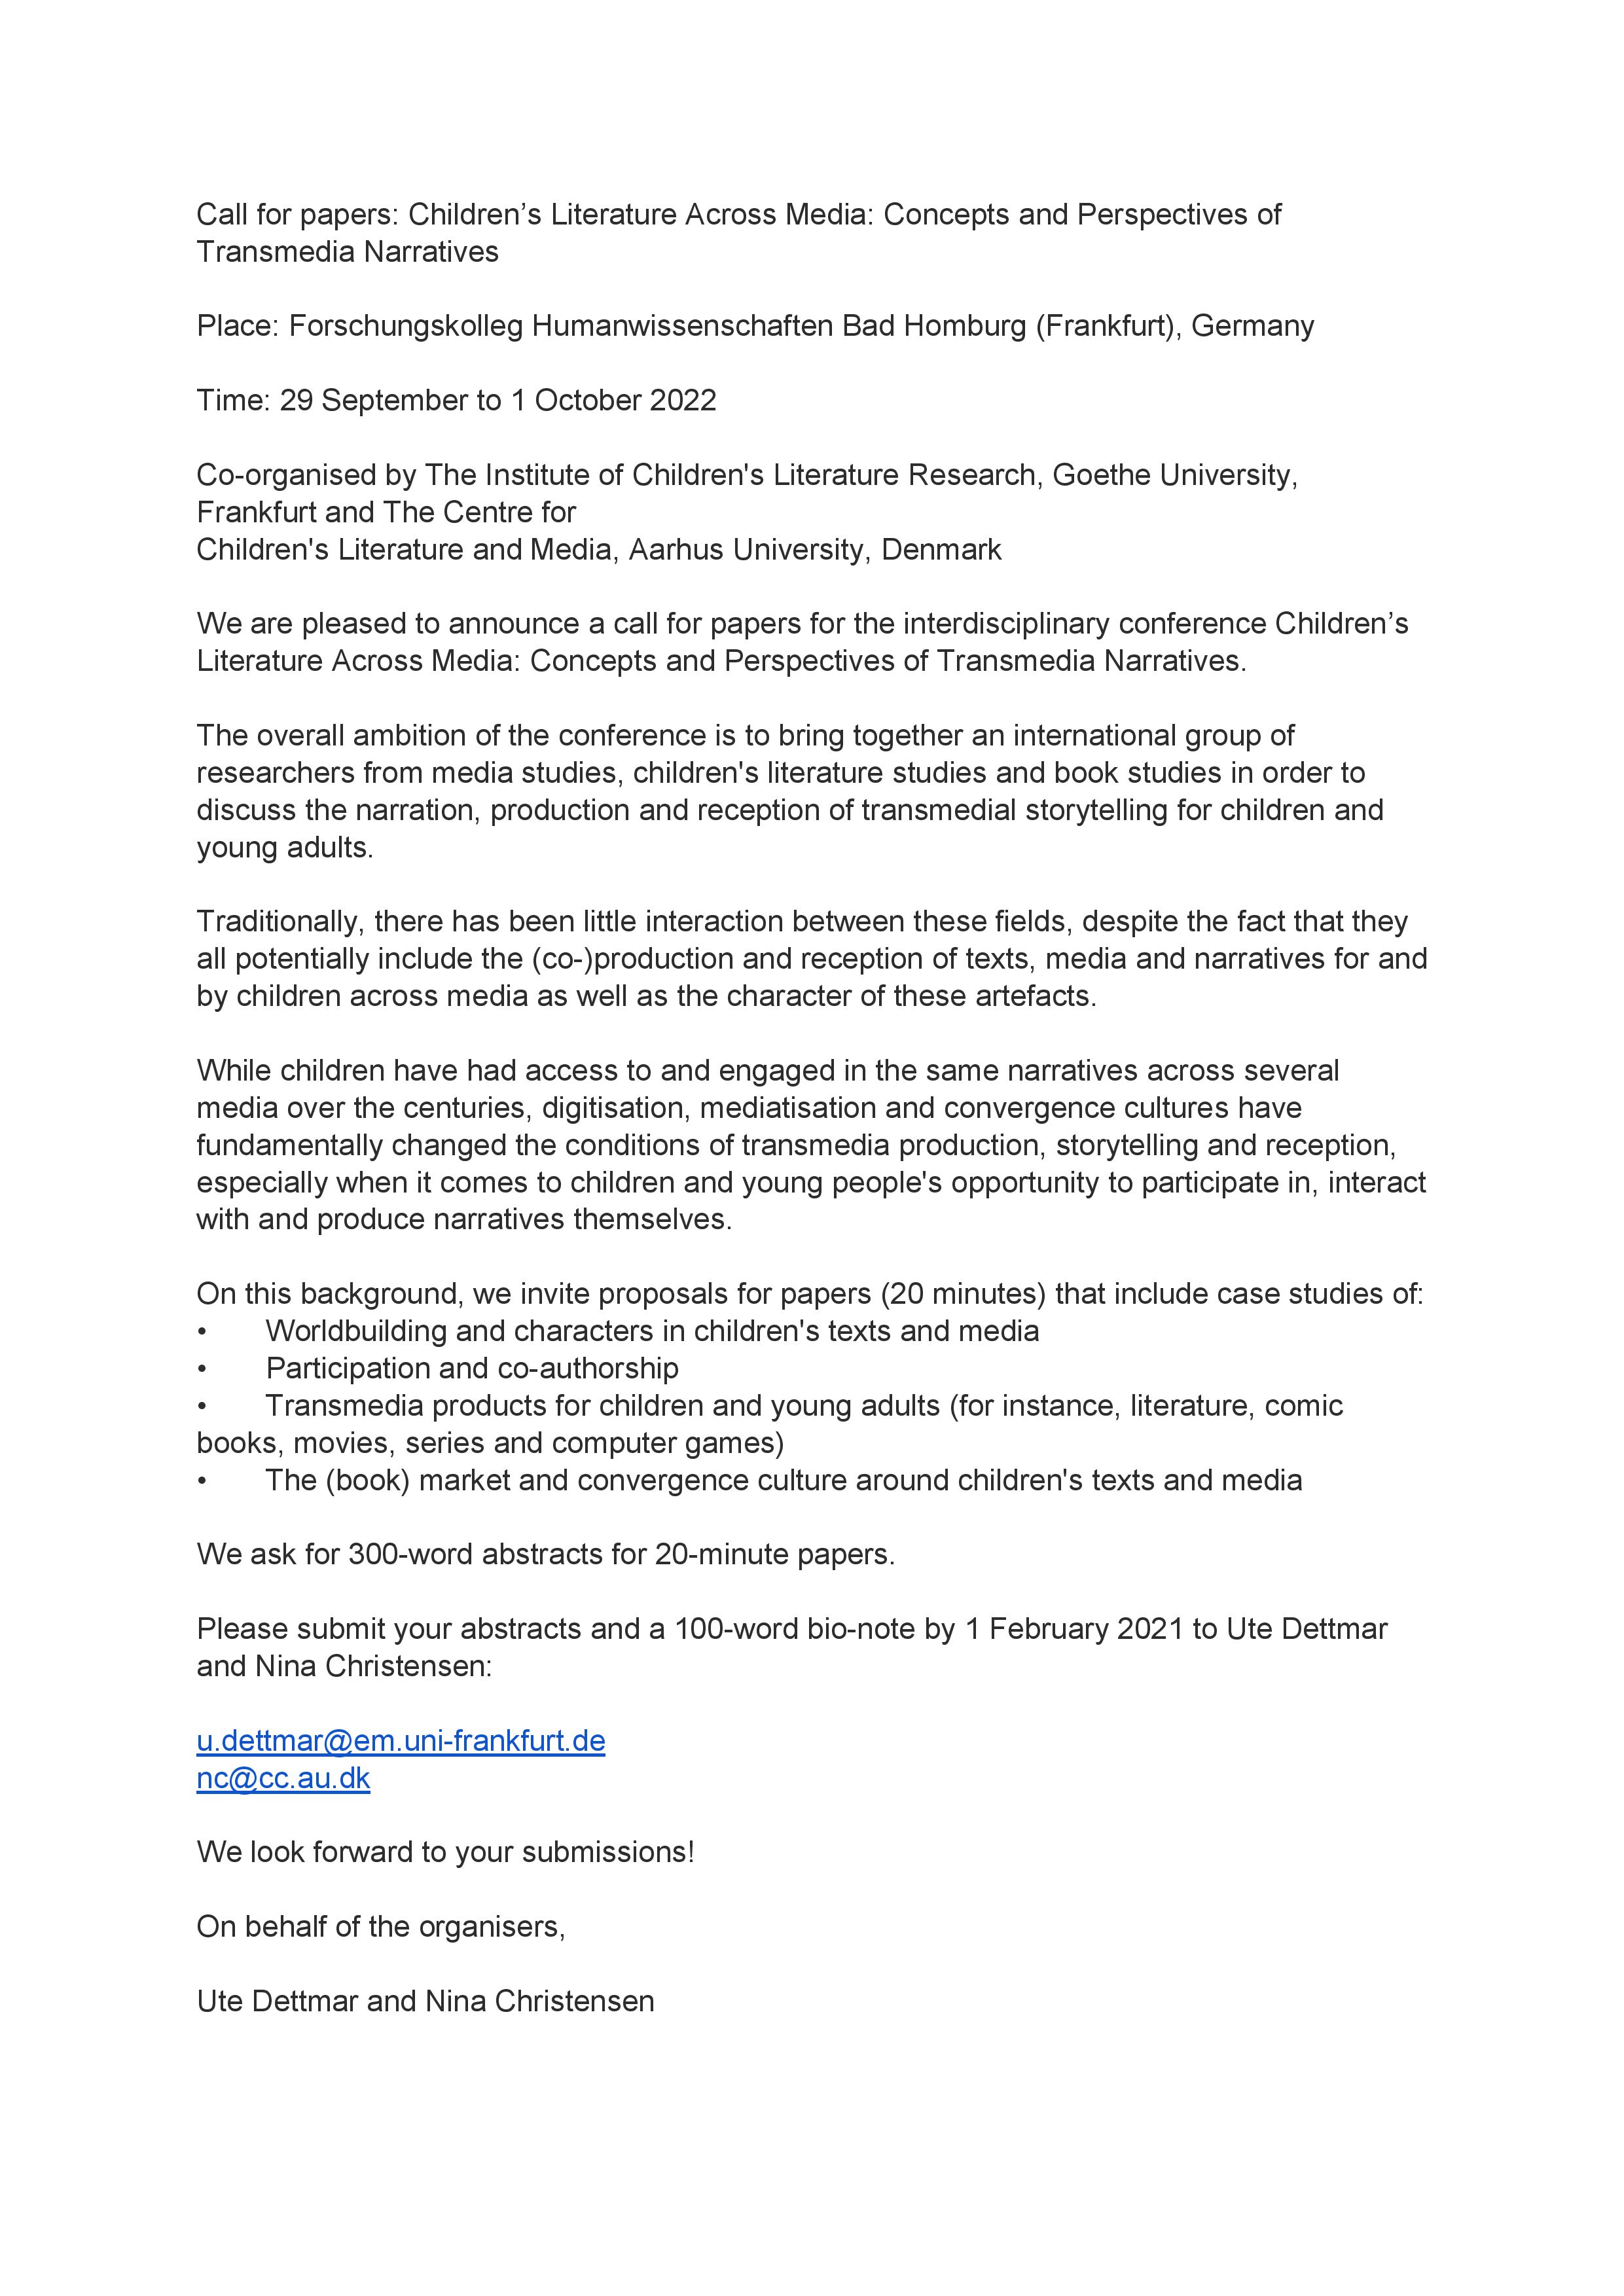 Knurre Bliv ved Låse Int'l Research Society for Children's Literature on Twitter: "CFP:  Children's Literature Across Media: Concepts and Perspectives of Transmedia  Narratives Place: Frankfurt, Germany Dates: 29 September - 1 October 2022  Submit your abstracts